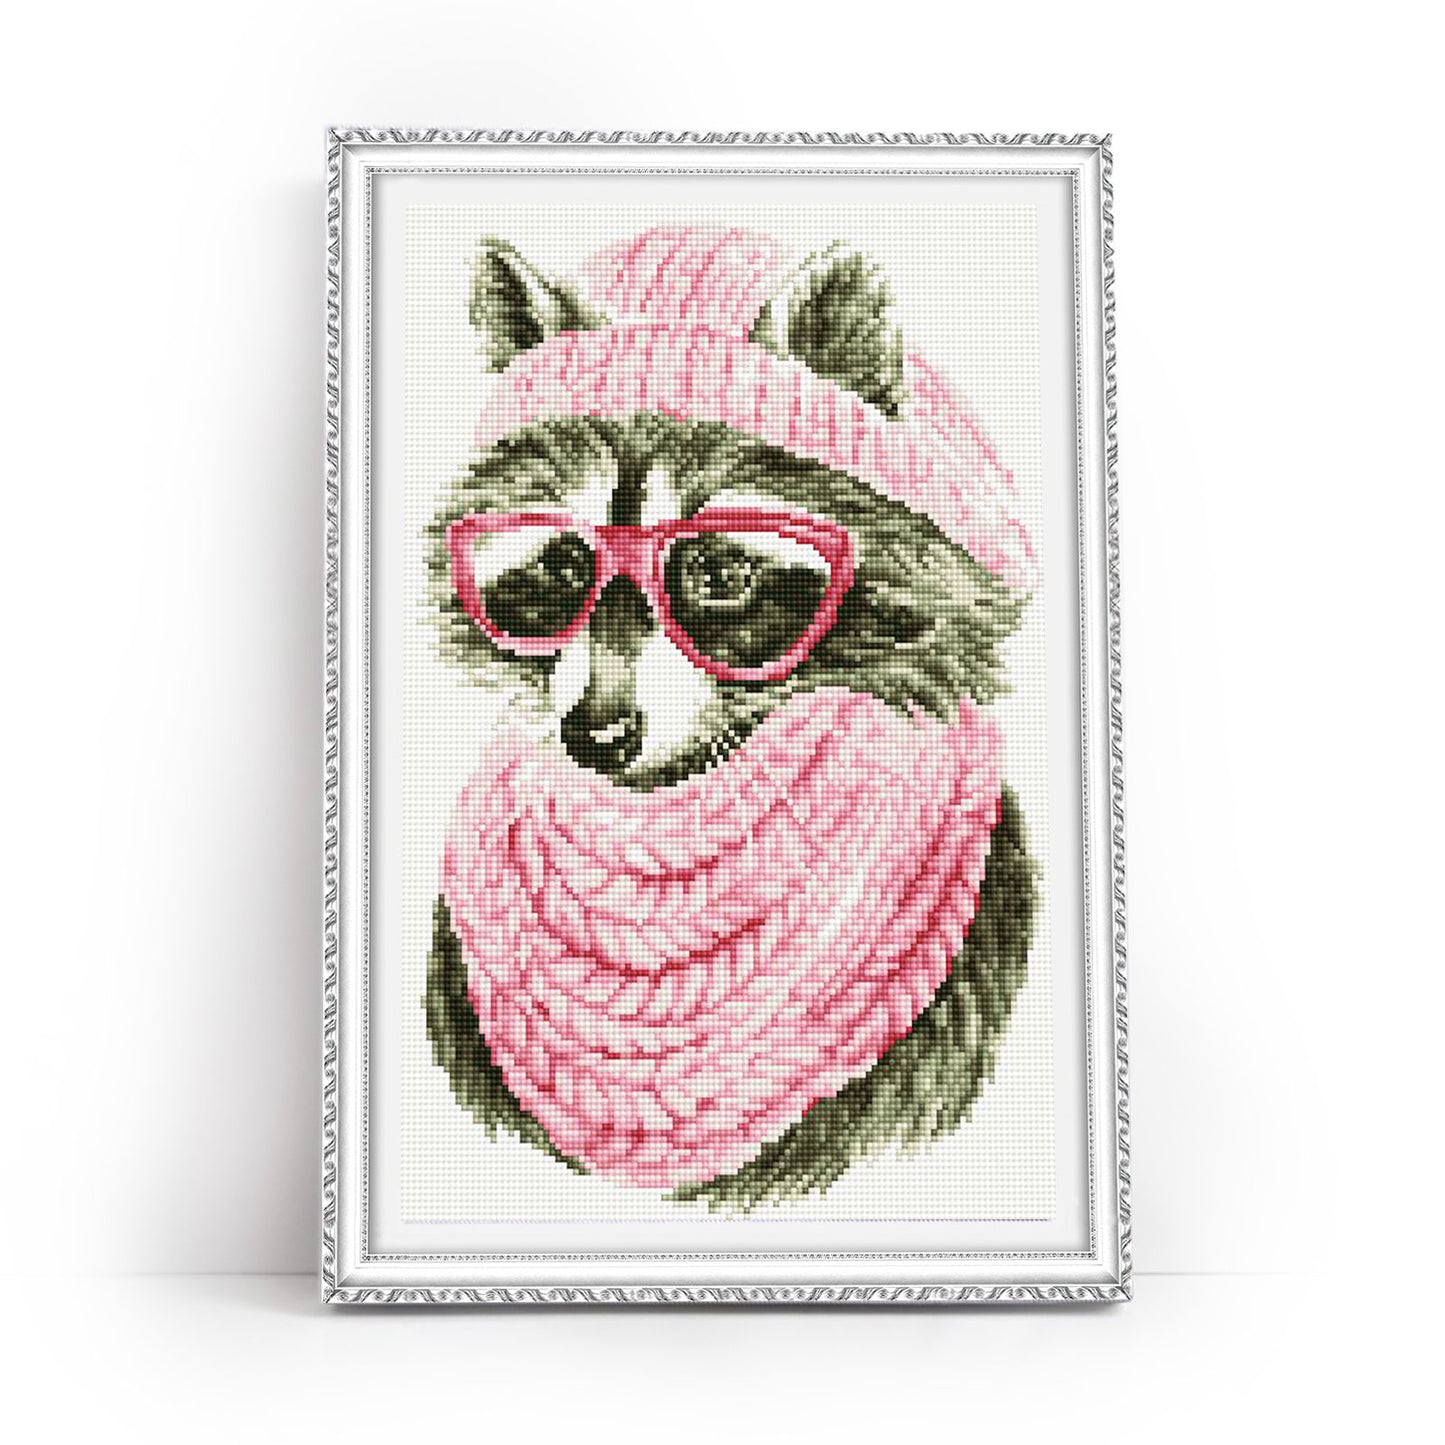 Diamond painting - LC009e - Raccoon with glasses